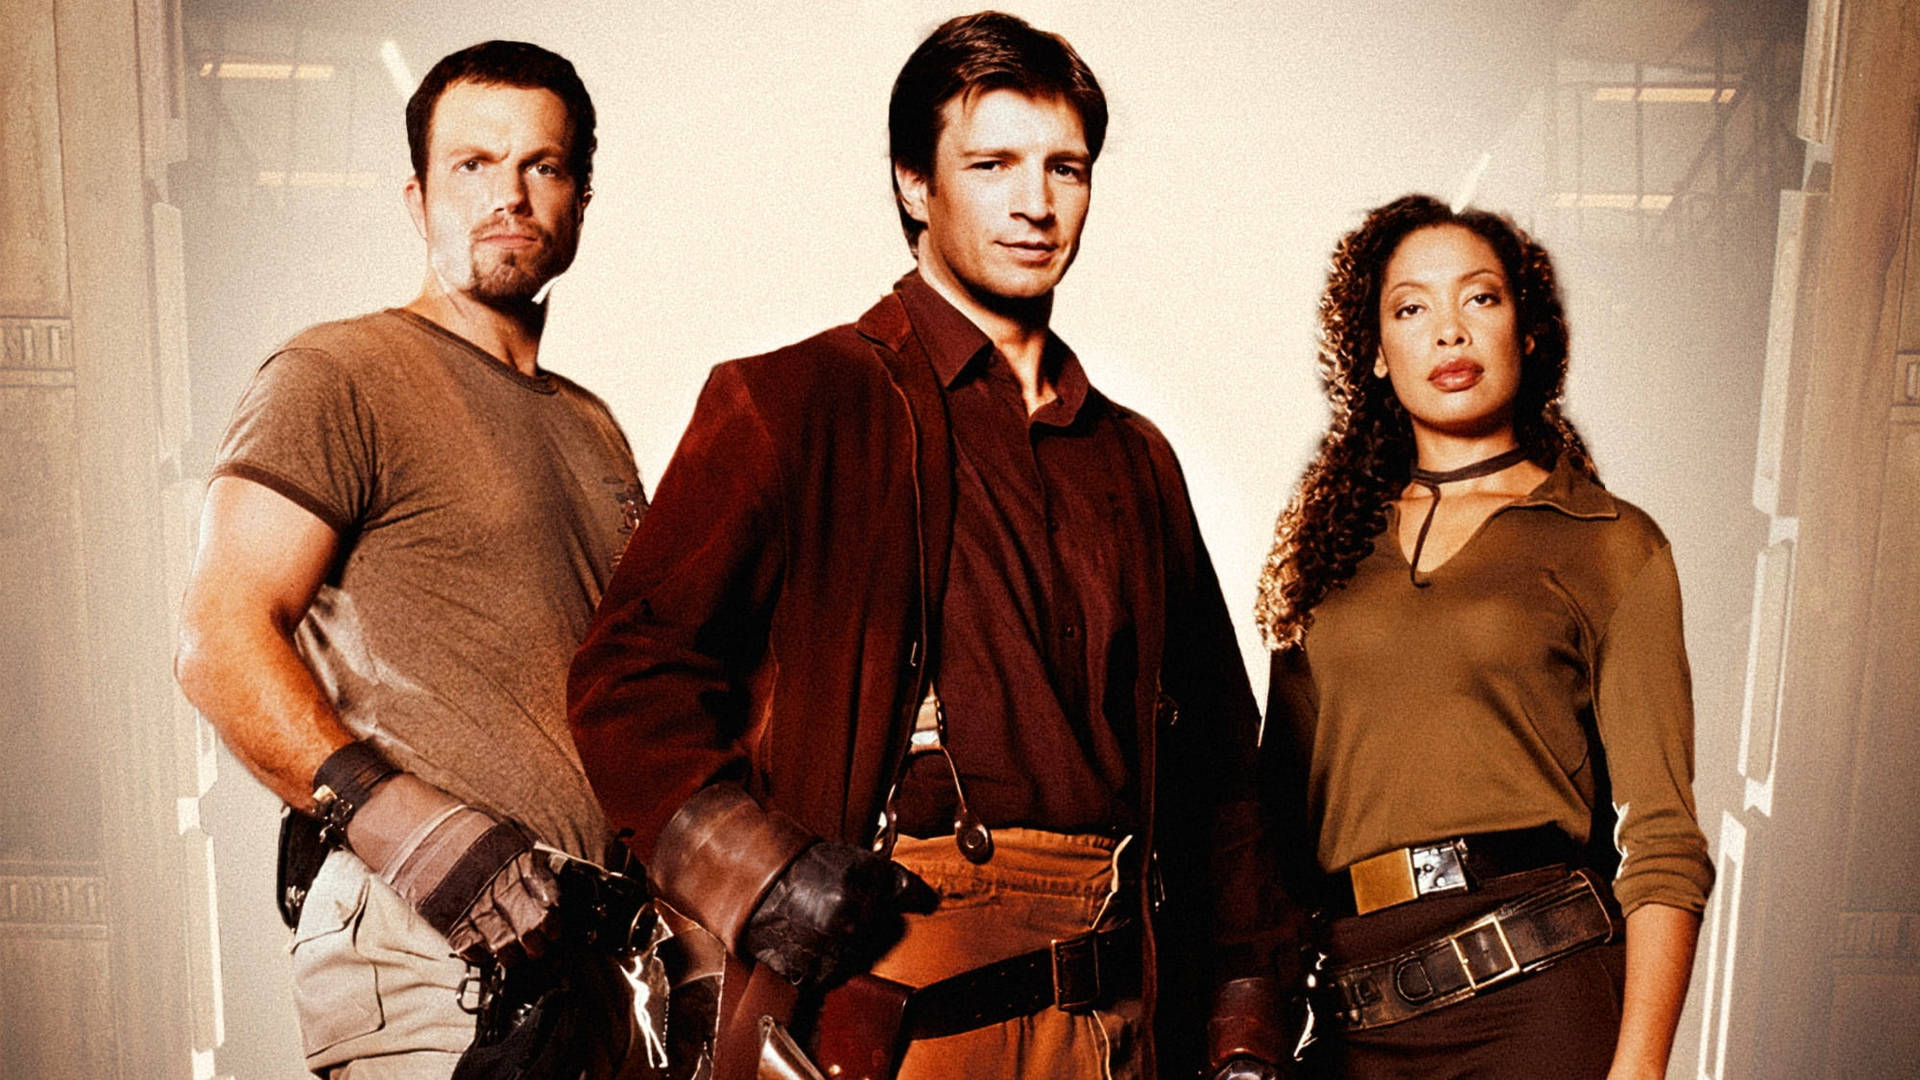 Nathan Fillion Brown Clothes Firefly